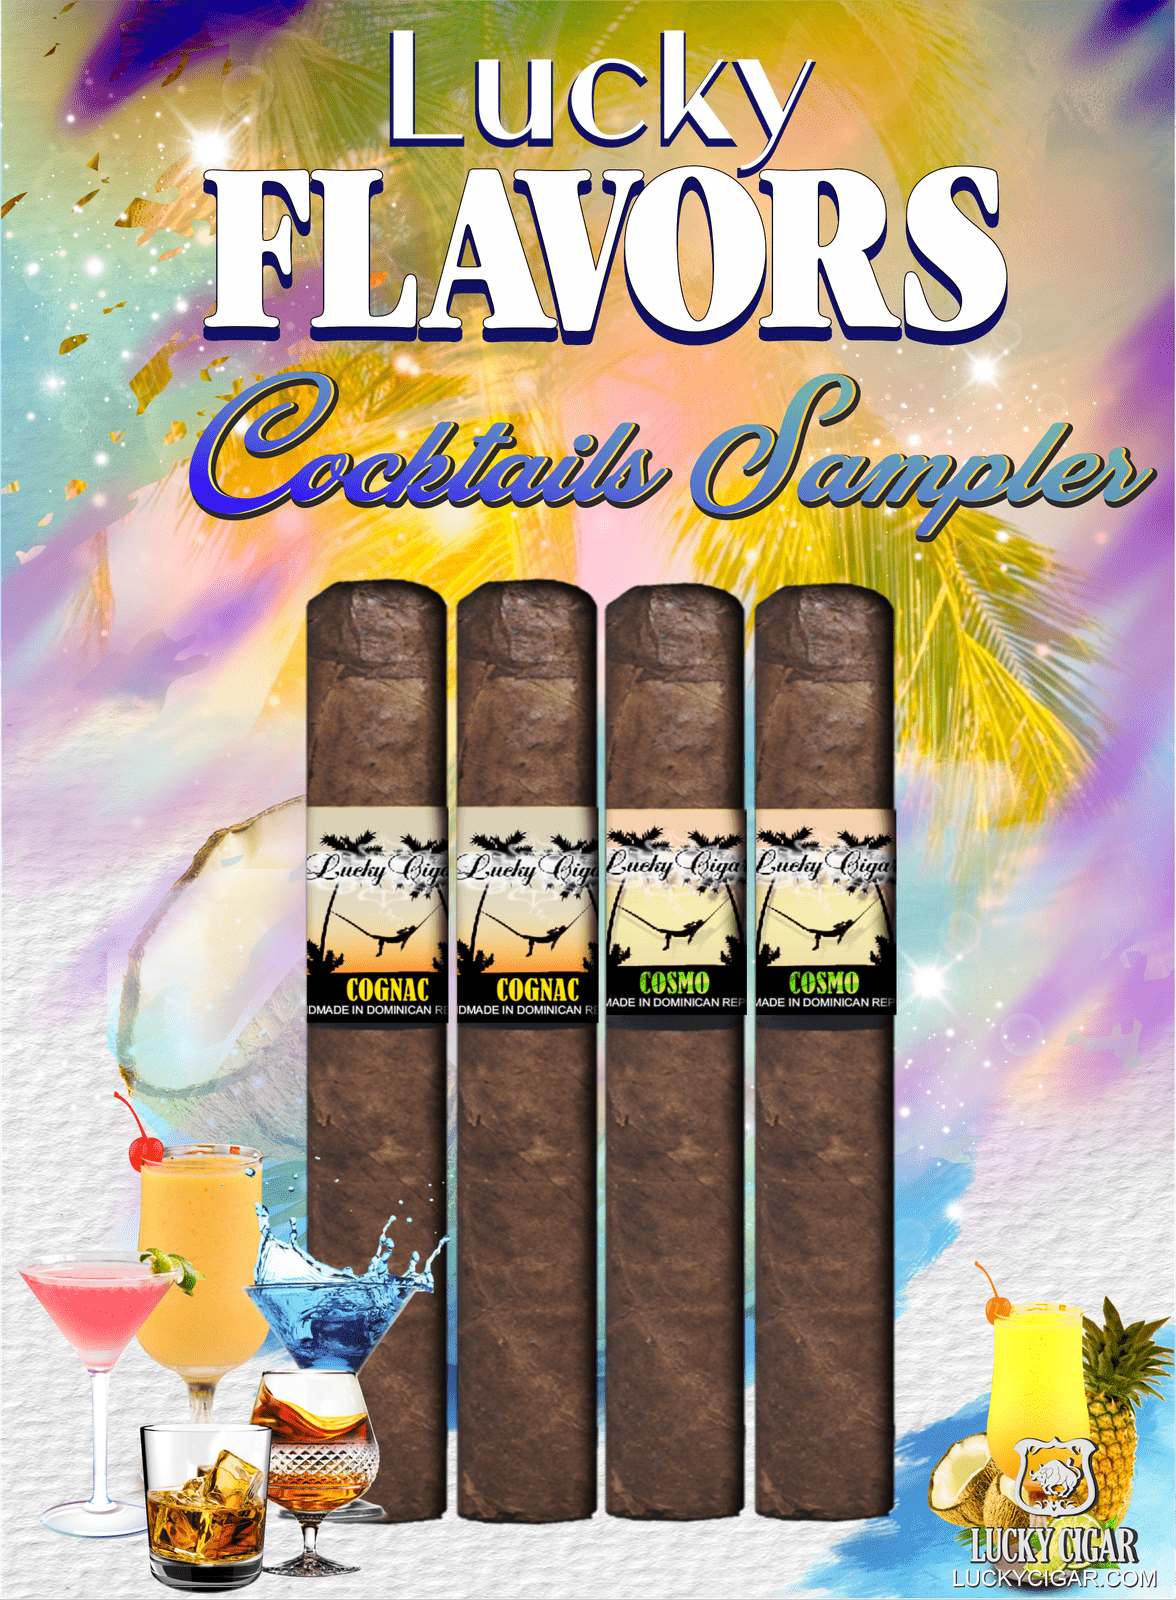 Flavored Cigars: Lucky Flavors 4 Piece Cocktails Sampler Cognac, Cosmo 2 Cognac 5x42 Cigars 2 Cosmo 5x42 Cigars